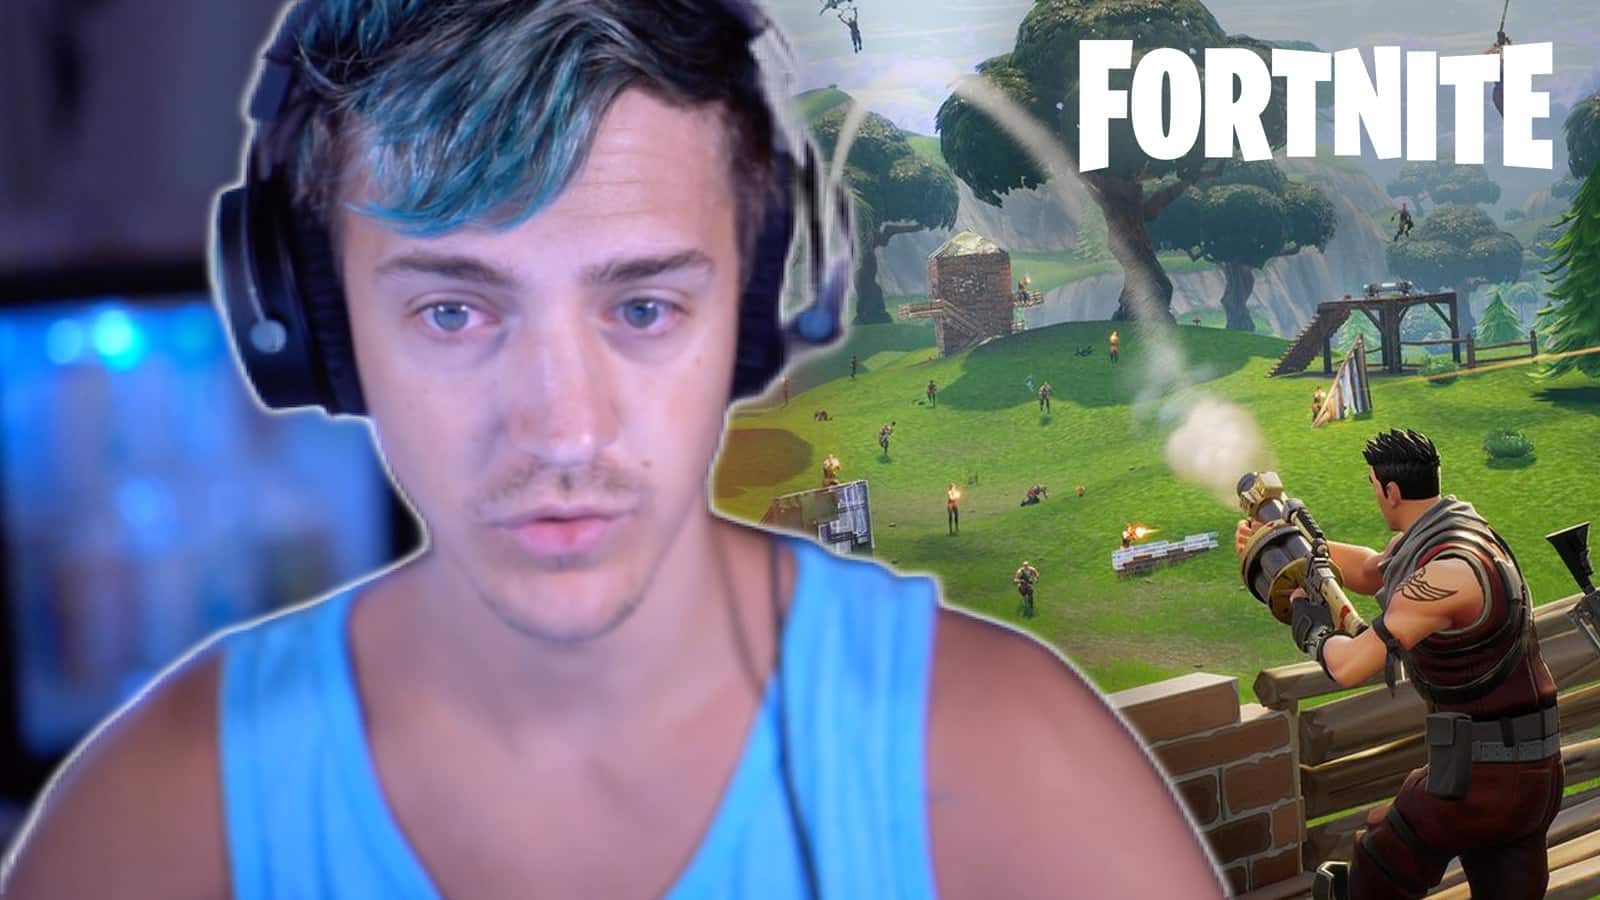 Ninja claims Fortnite fight victim at DreamHack Dallas was “asking” for ...